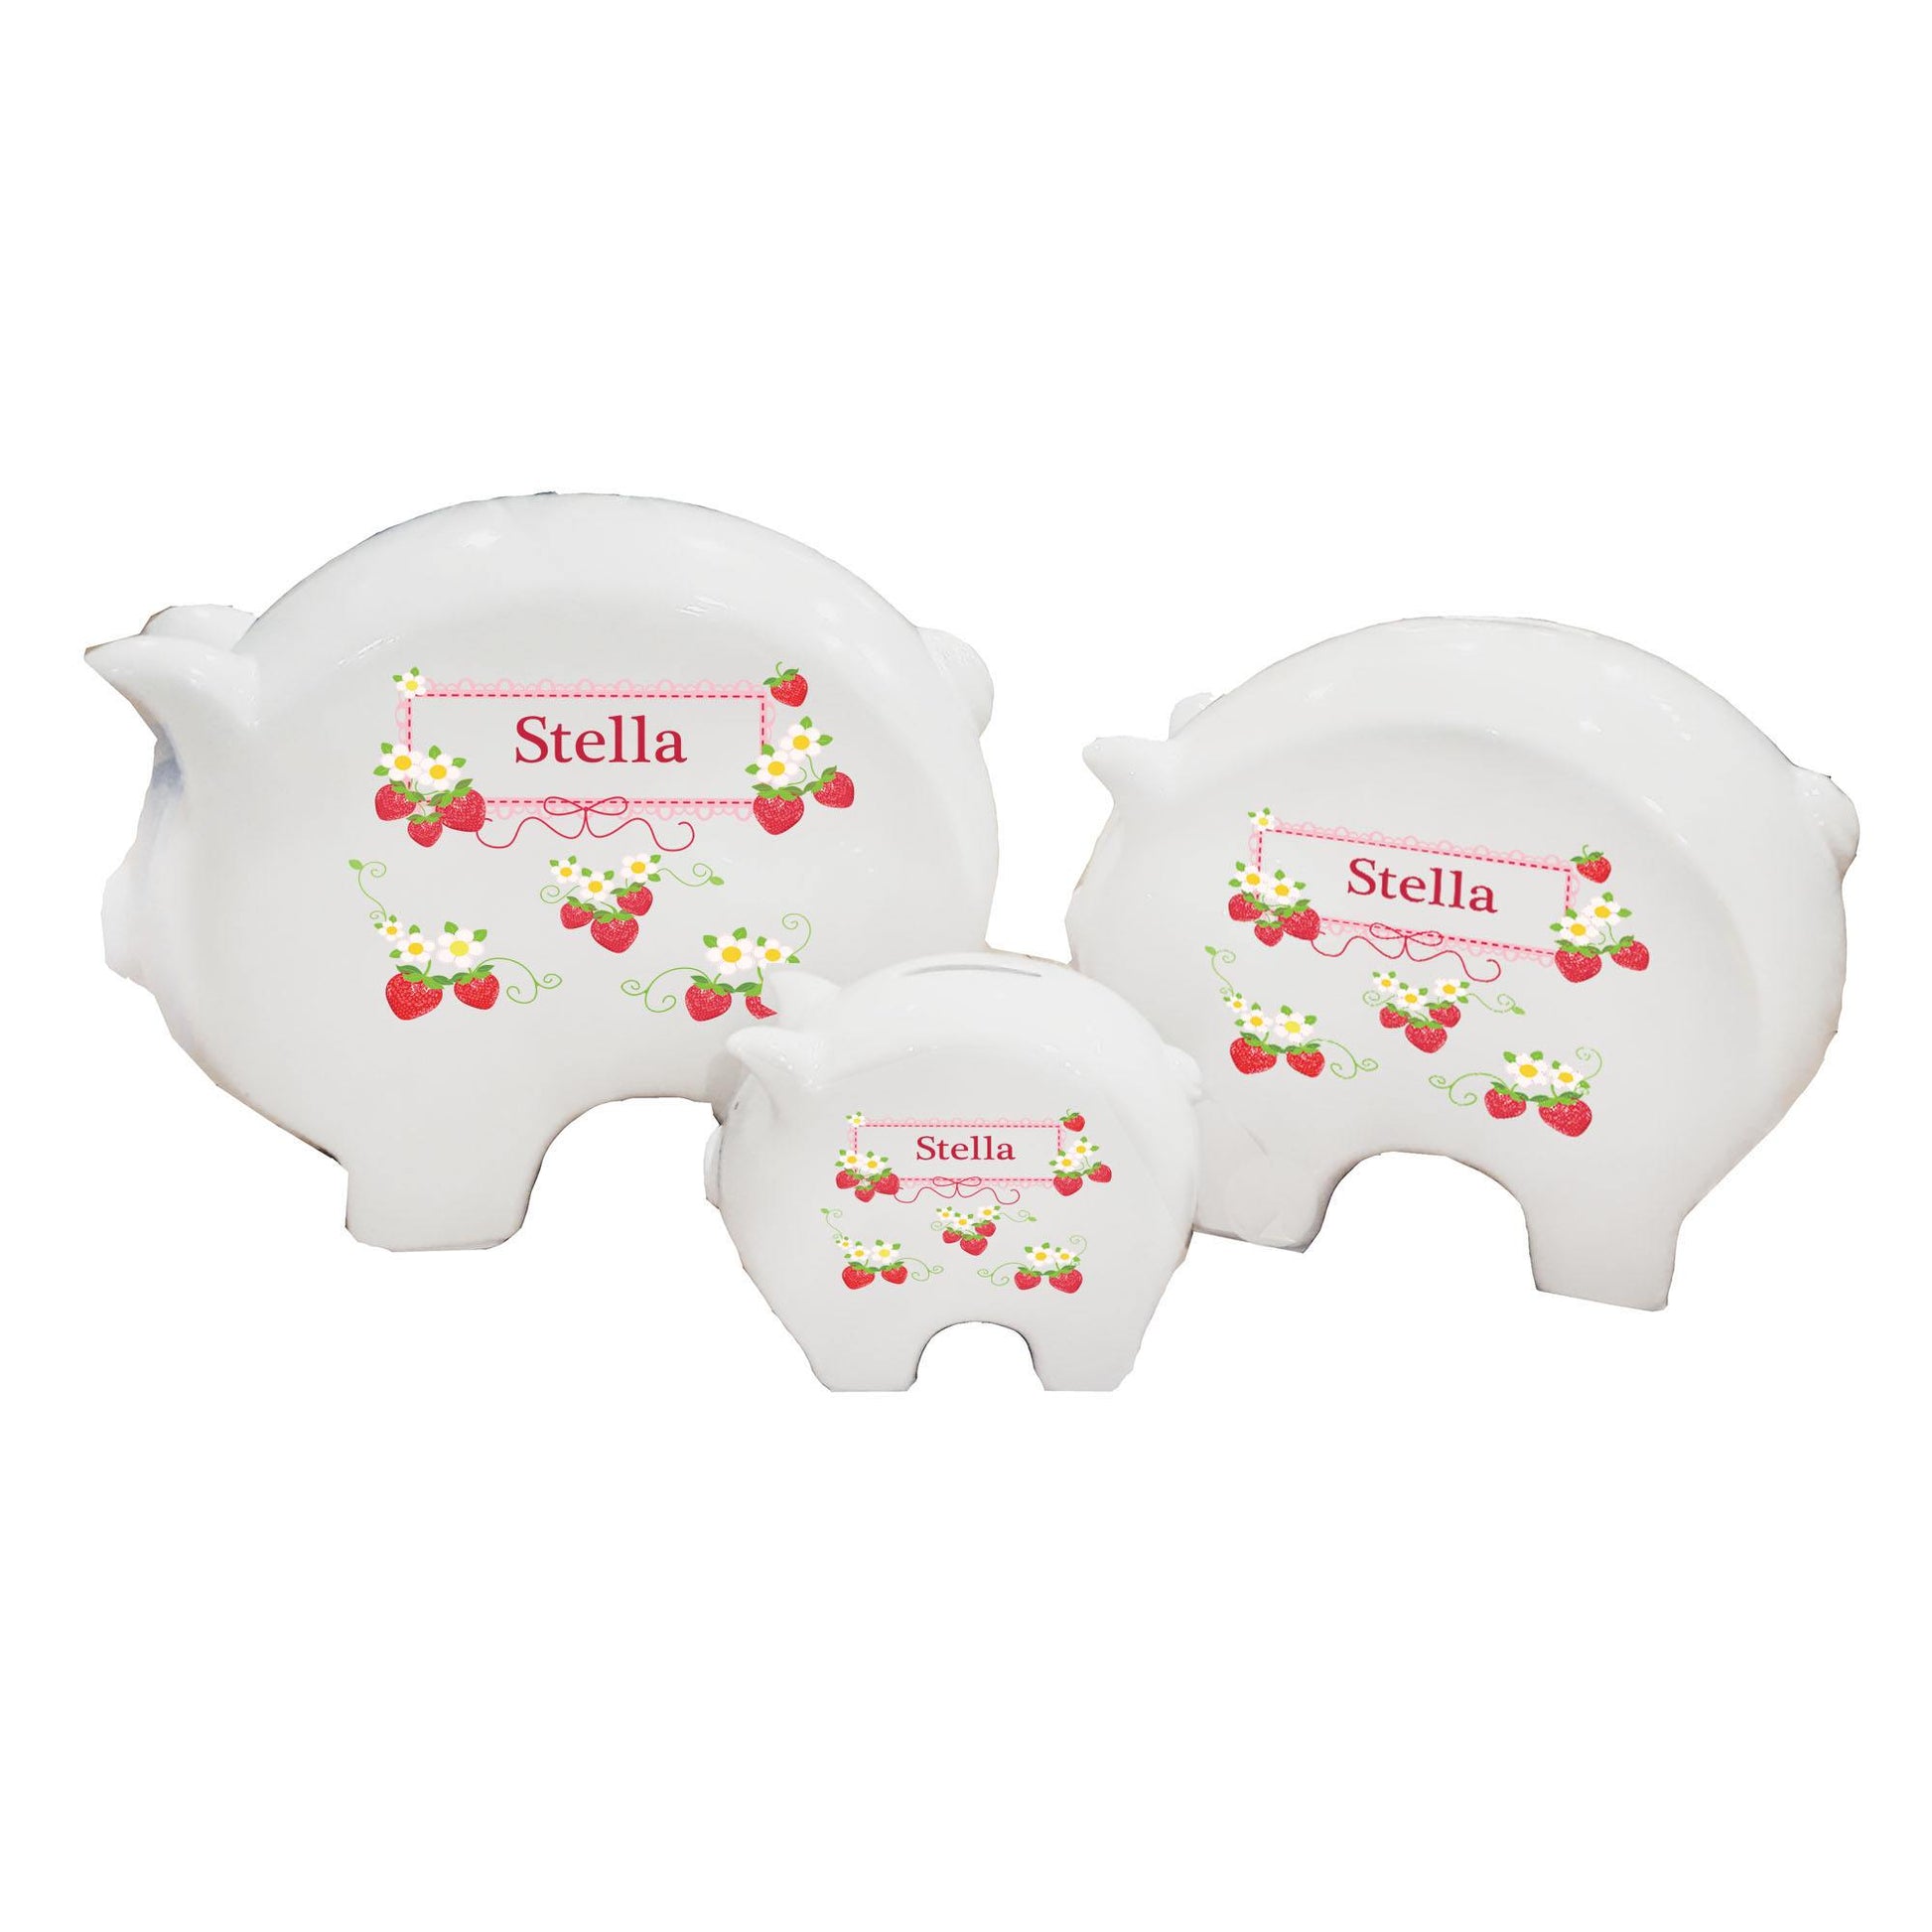 Personalized Piggy Bank with Strawberries design